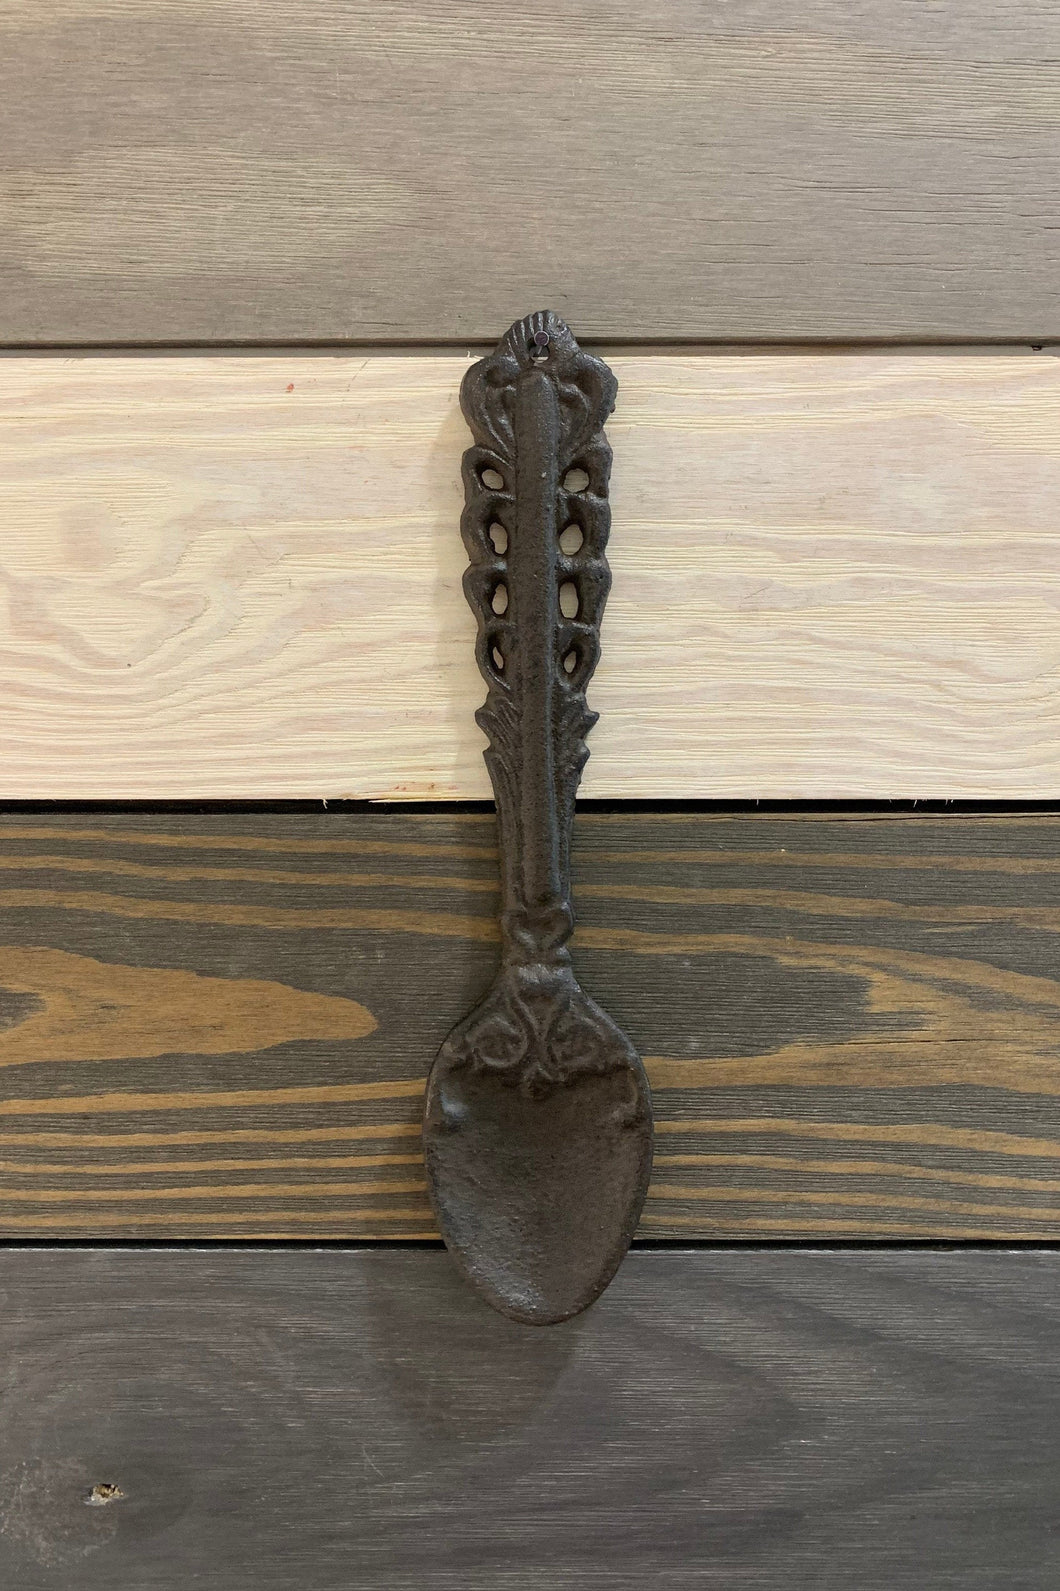 Cast Iron Spoon, Kitchen Wall Decor, Great For Any Kitchen, Over-sized Spoon, Farm House Wall Decor, Farm House-Kitchen Wall Art